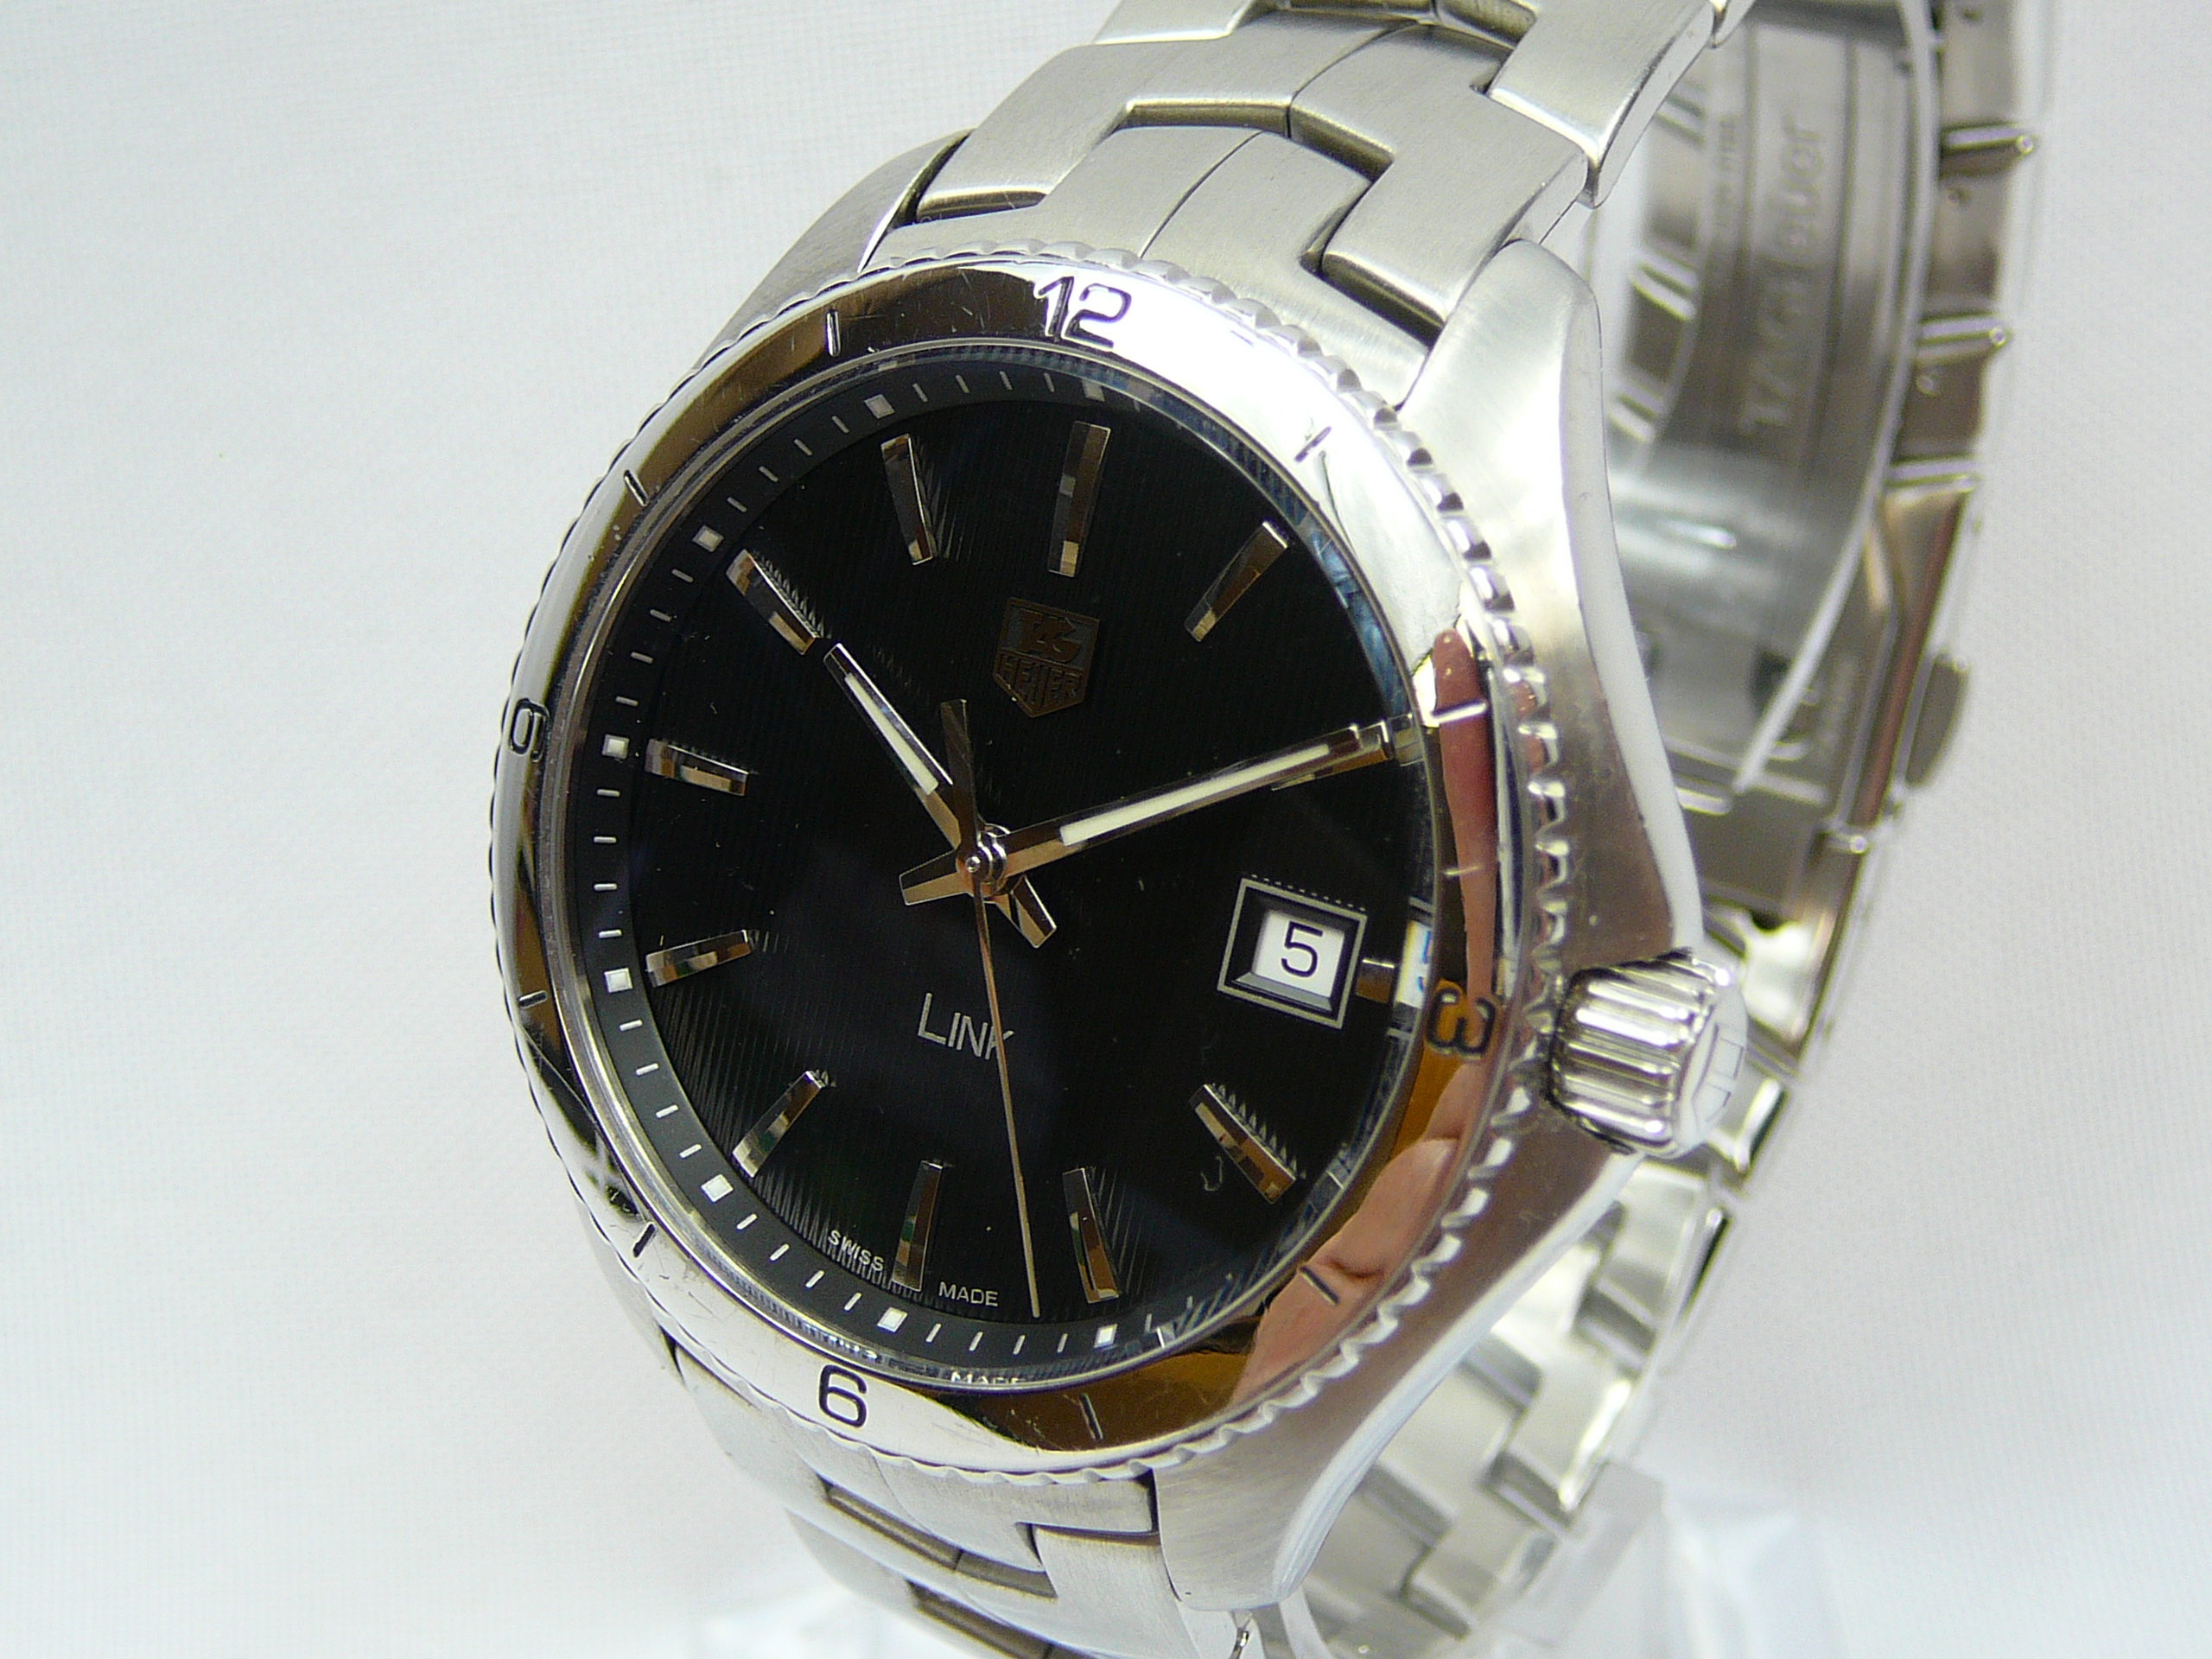 Gents Tag Heuer Wrist Watch - Image 2 of 3